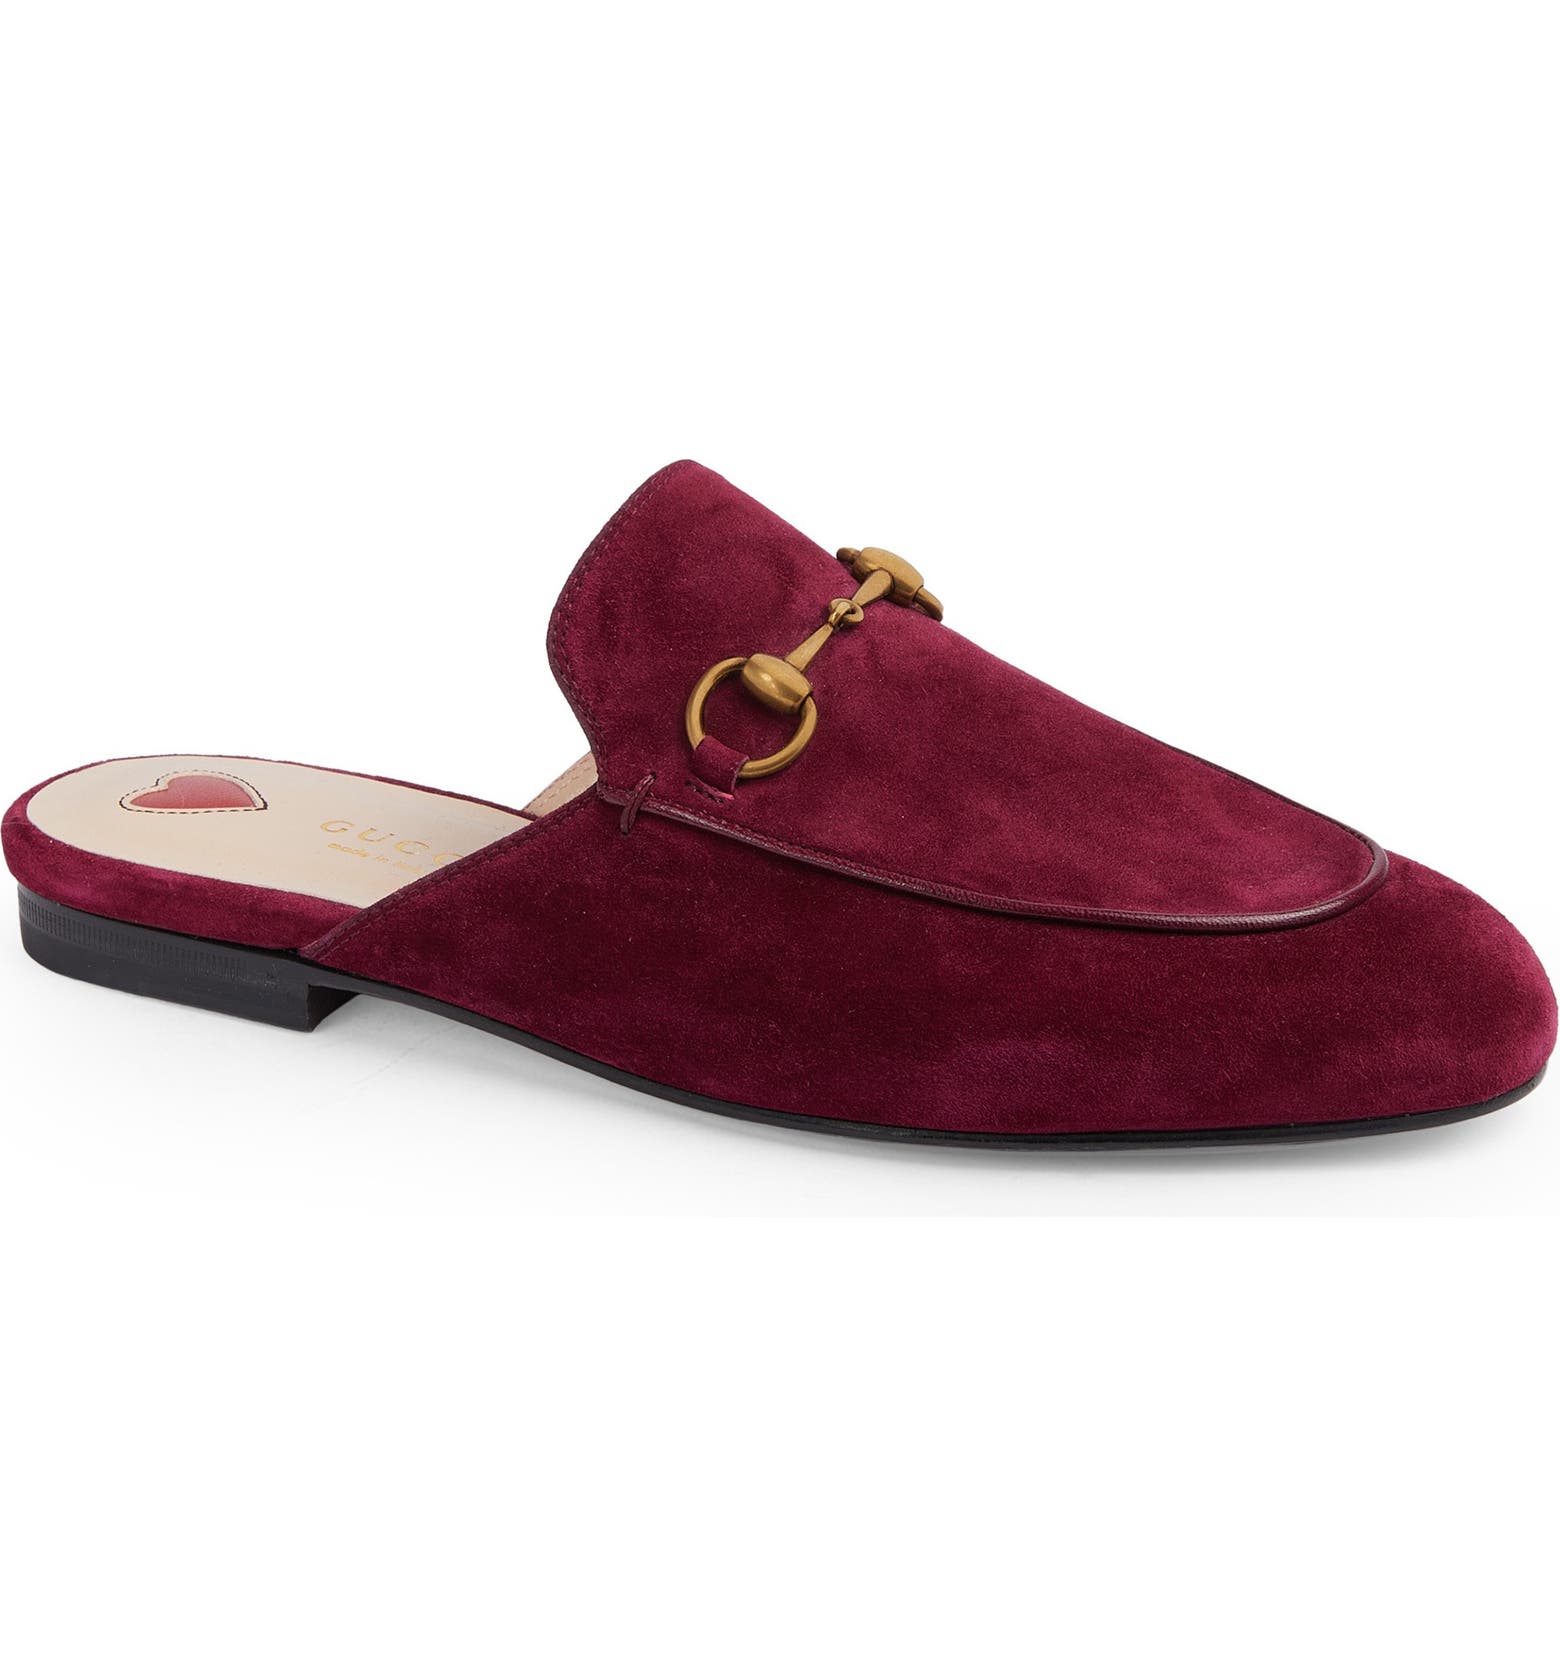 Burgundy Gucci Princetown loafers